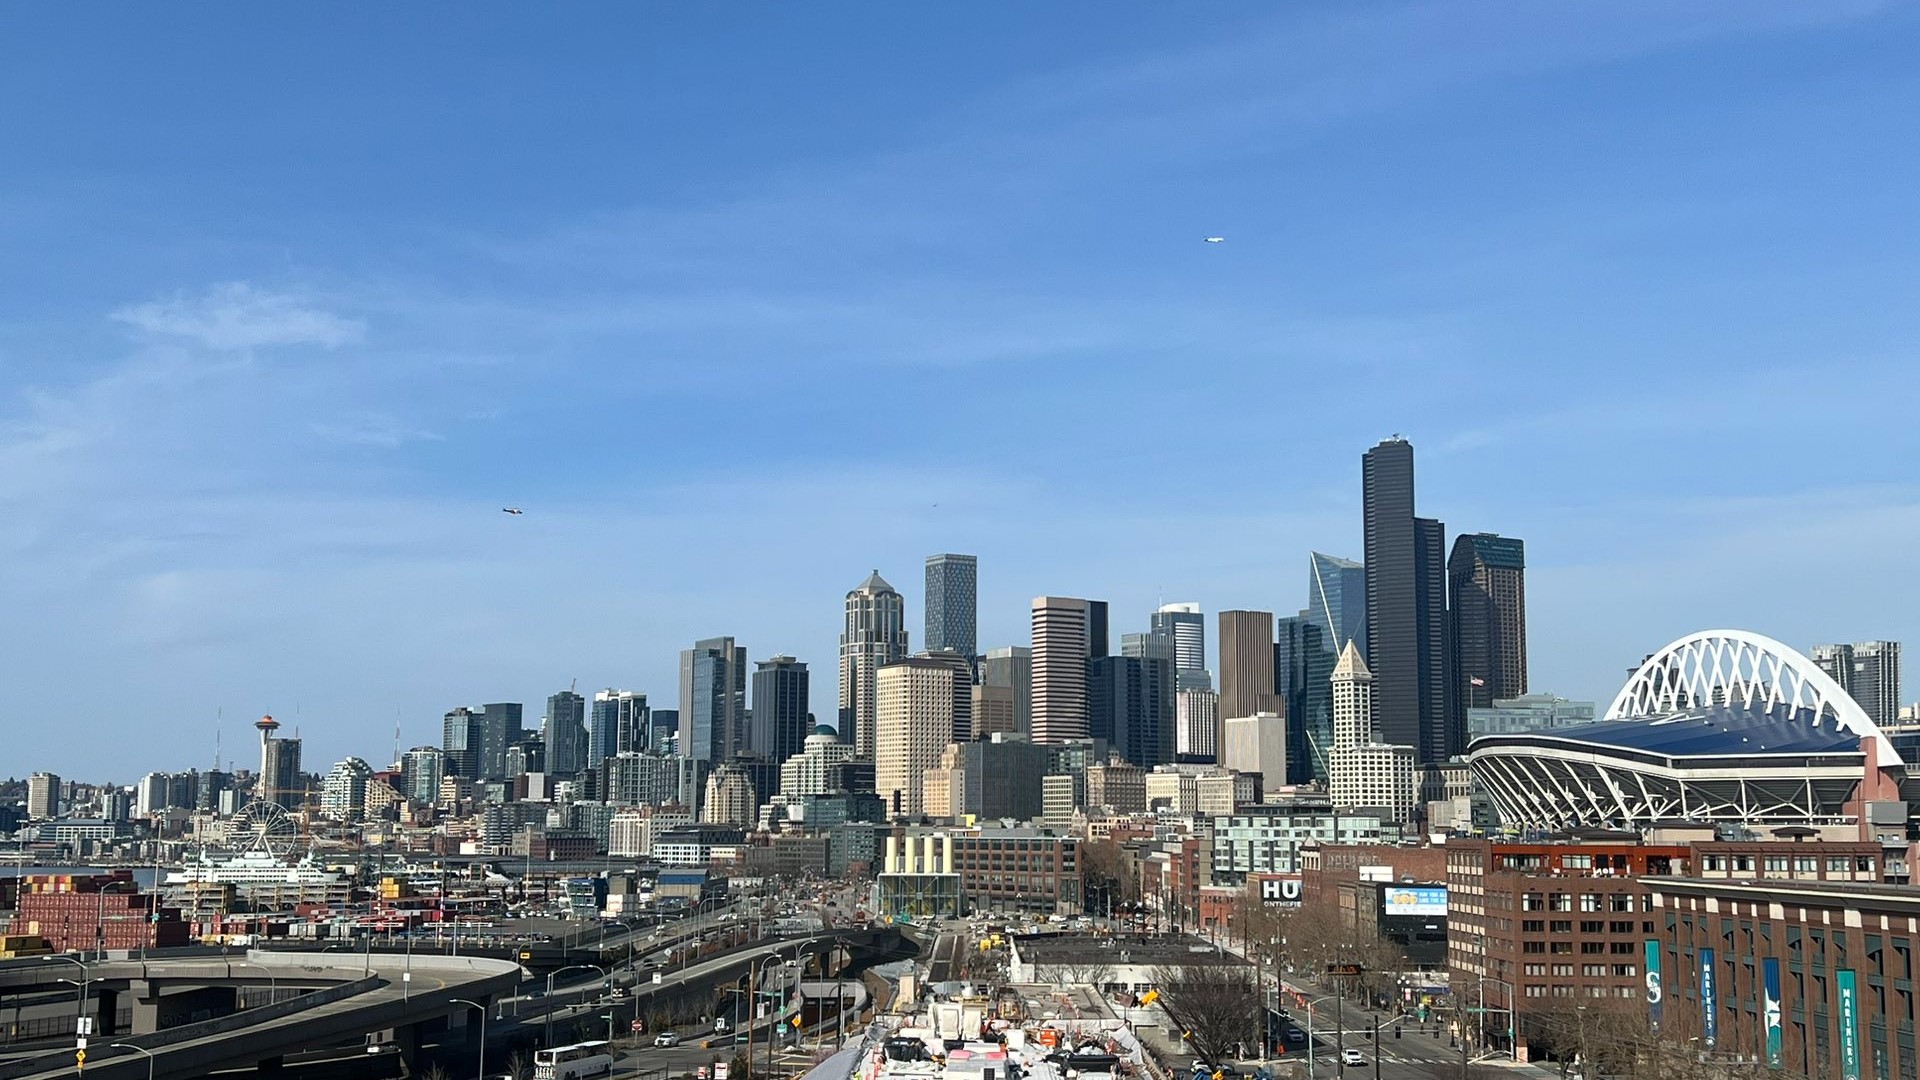 Over 3 million people visited downtown Seattle in July, the most monthly visitors since August 2019, a new report from the Downtown Seattle Association says.